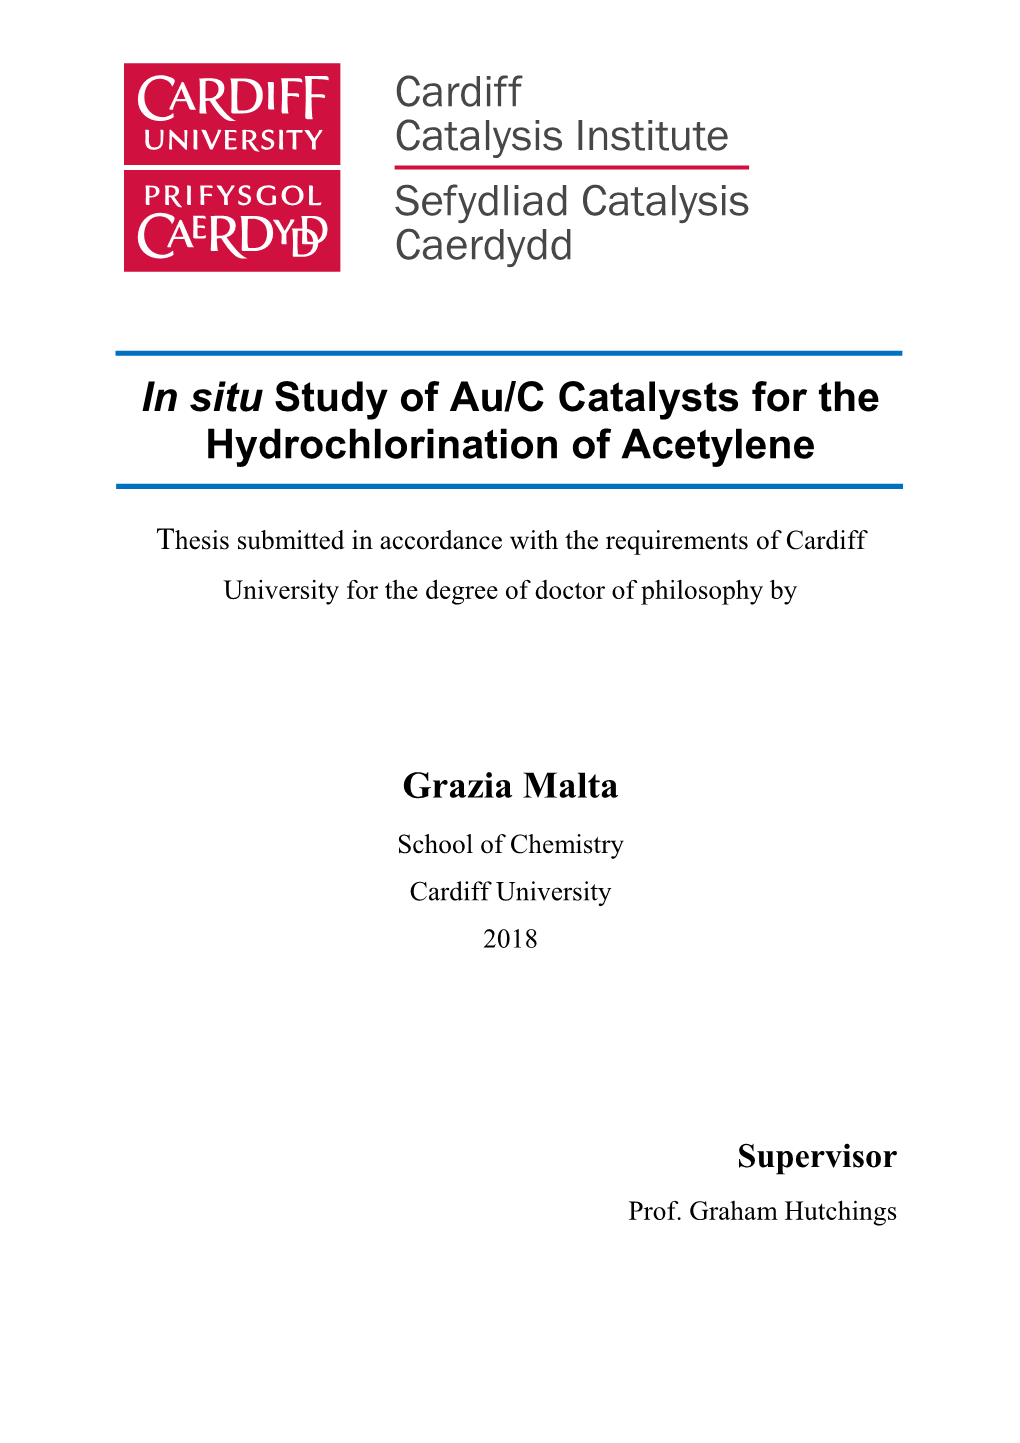 In Situ Study of Au/C Catalysts for the Hydrochlorination of Acetylene